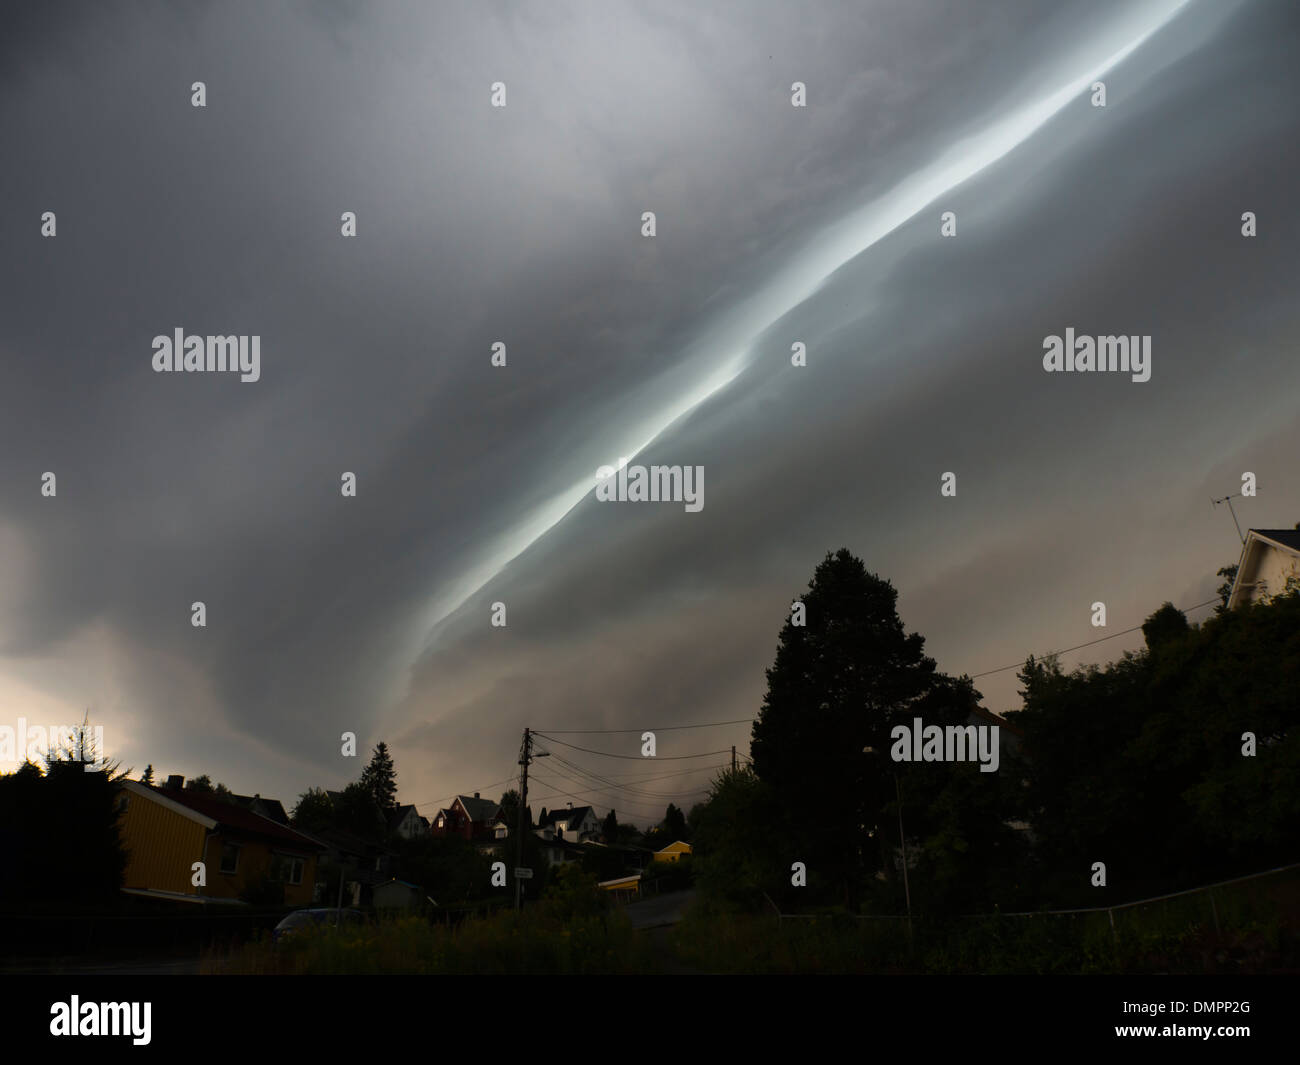 Ominous dark clouds over Oslo Norway, cloud formations with a distinct line of light across the sky, roll cloud or shelf cloud ? Stock Photo